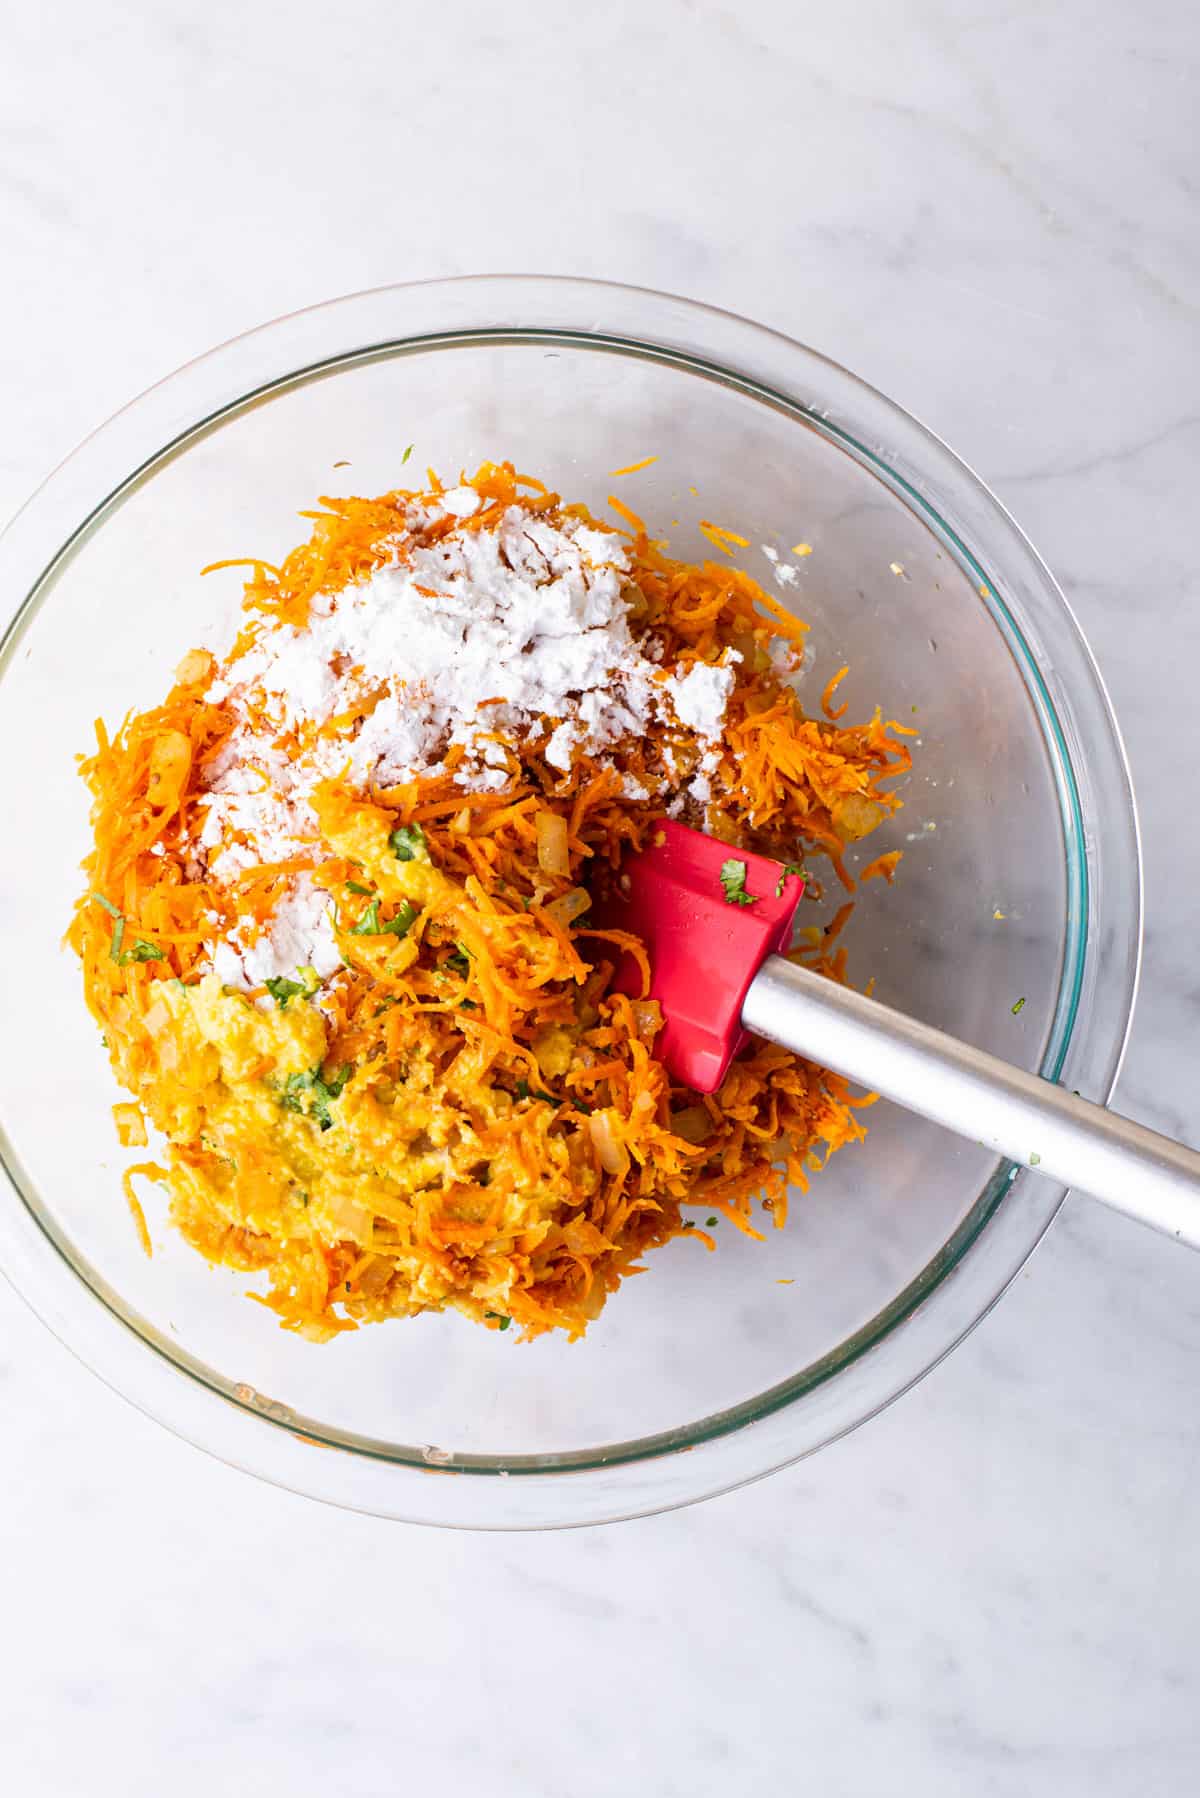 Mixture of grated carrots, pureed corn, flour, and spices in a bowl.